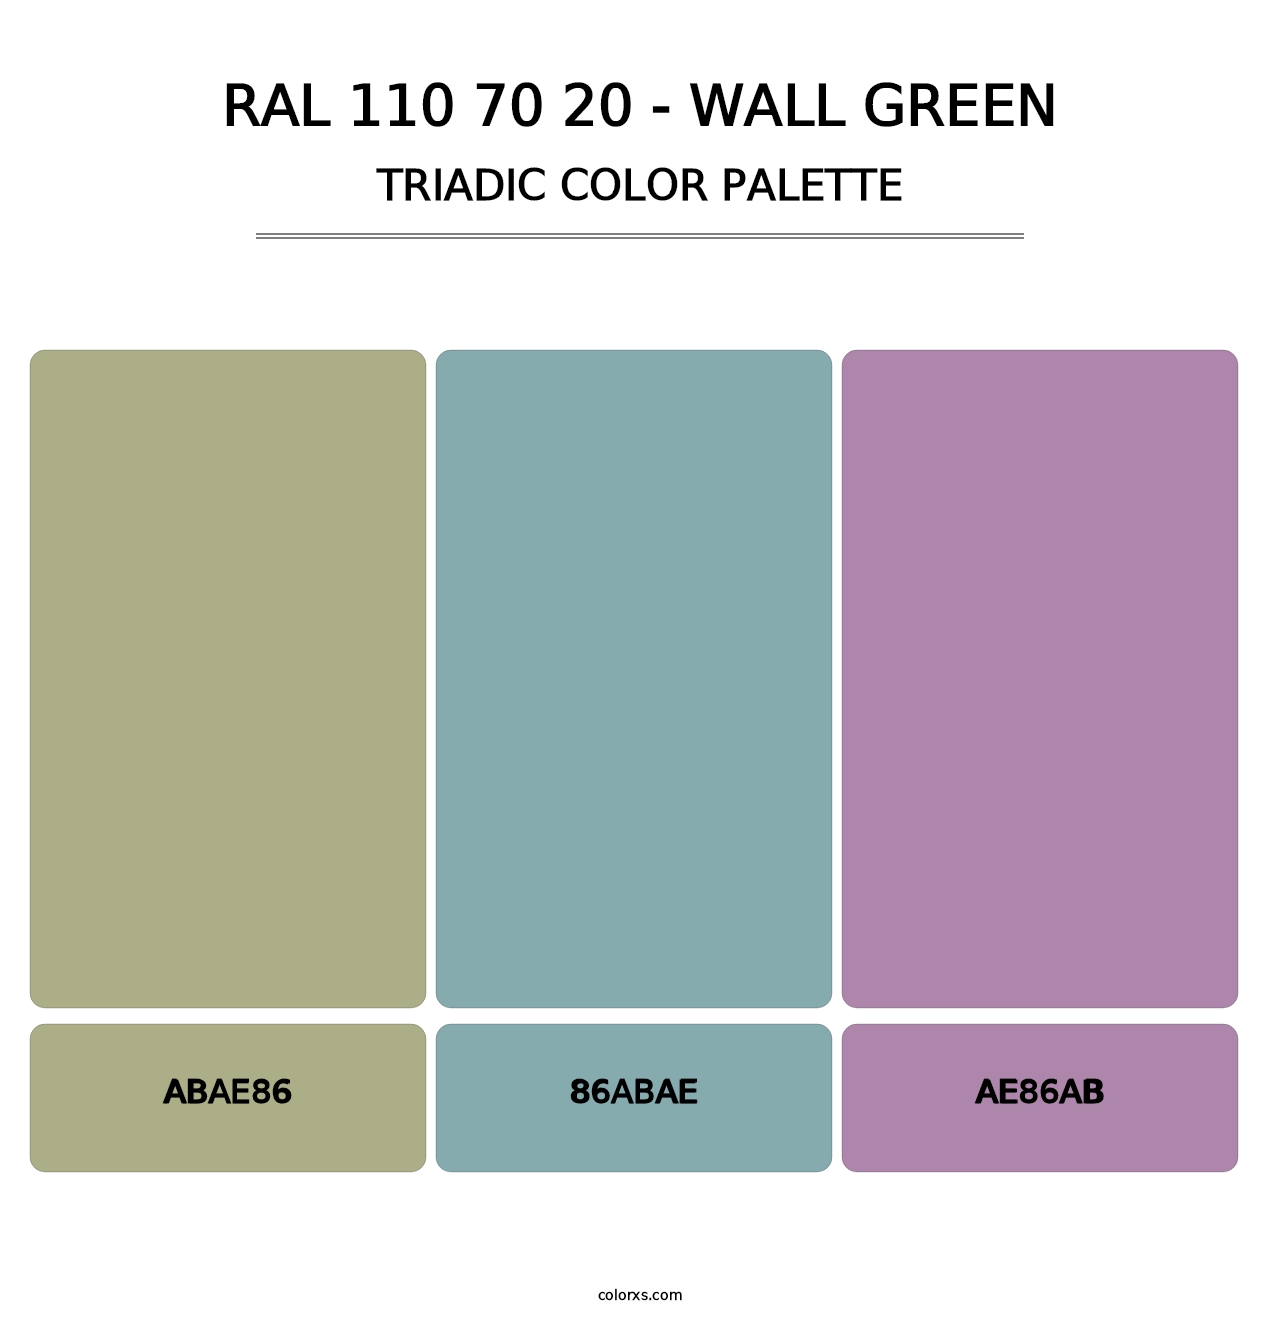 RAL 110 70 20 - Wall Green - Triadic Color Palette